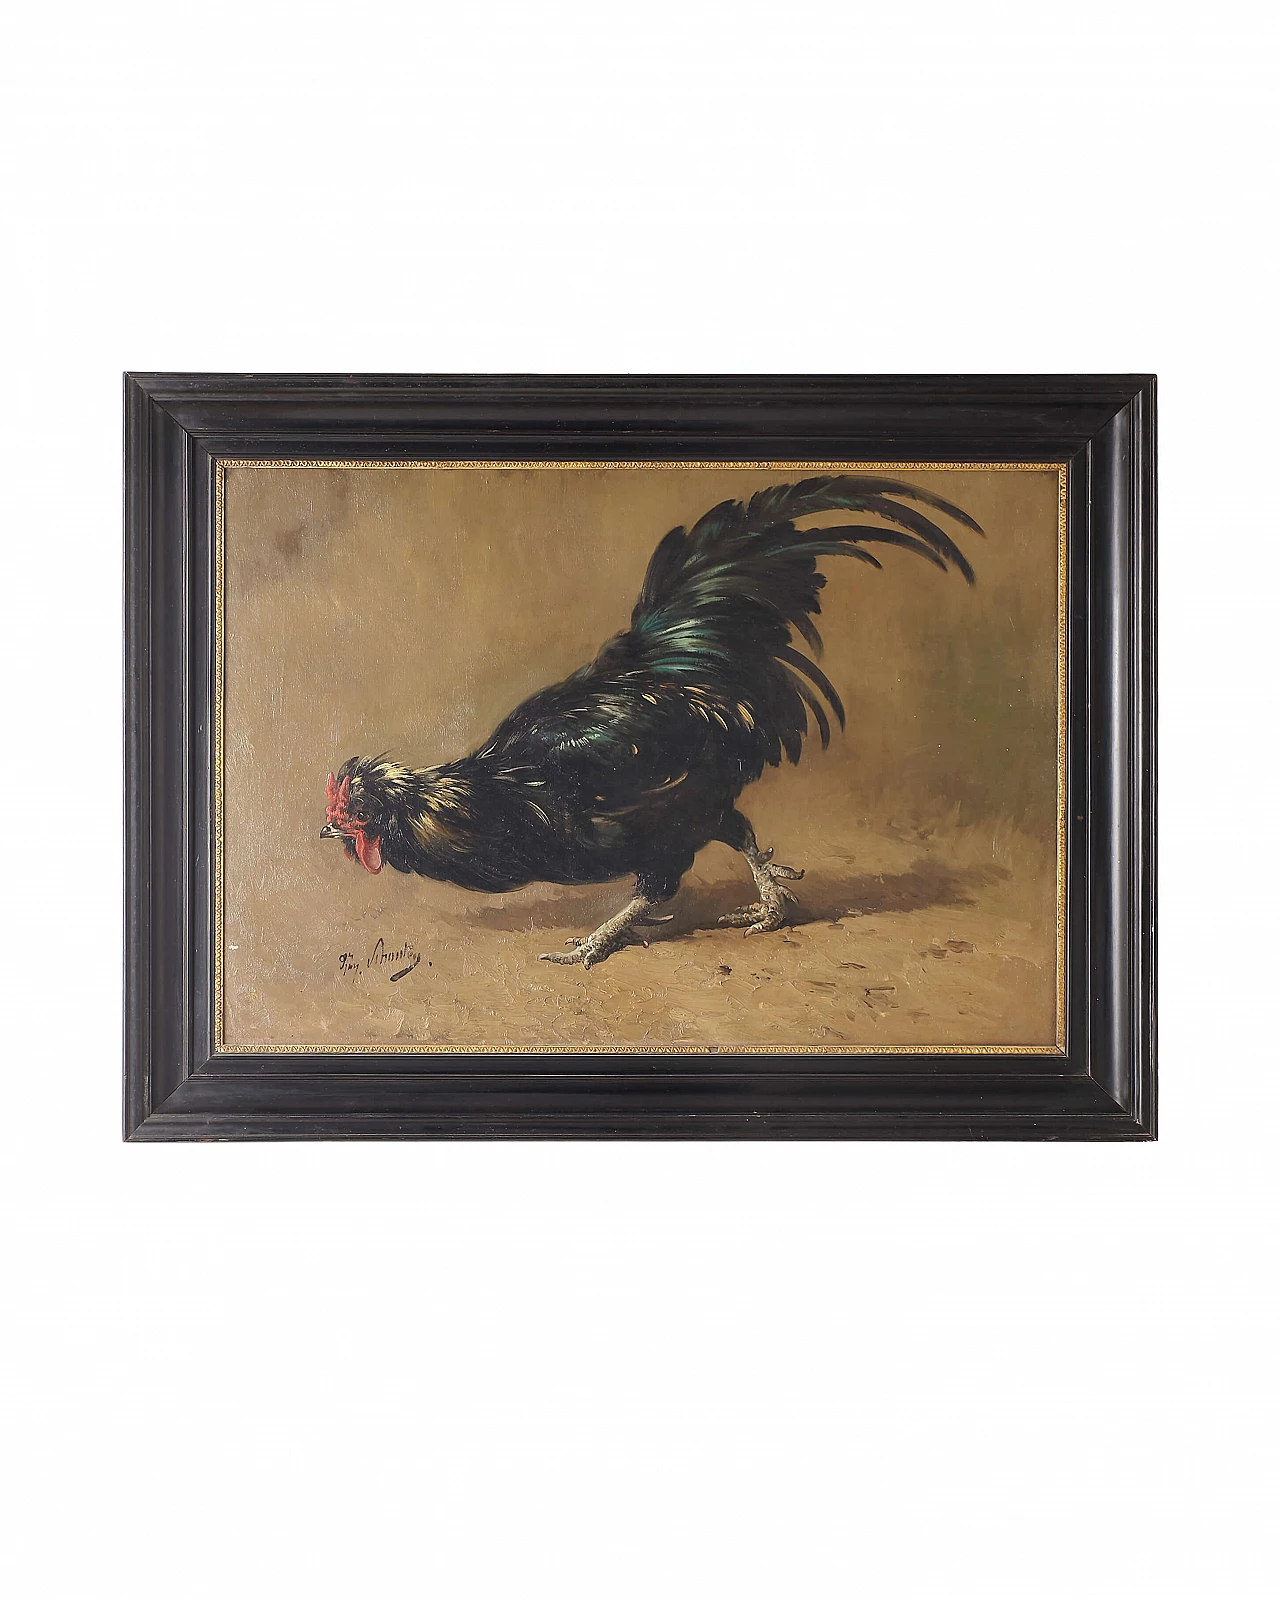 Oil painting with black rooster by Vihontey 1249867